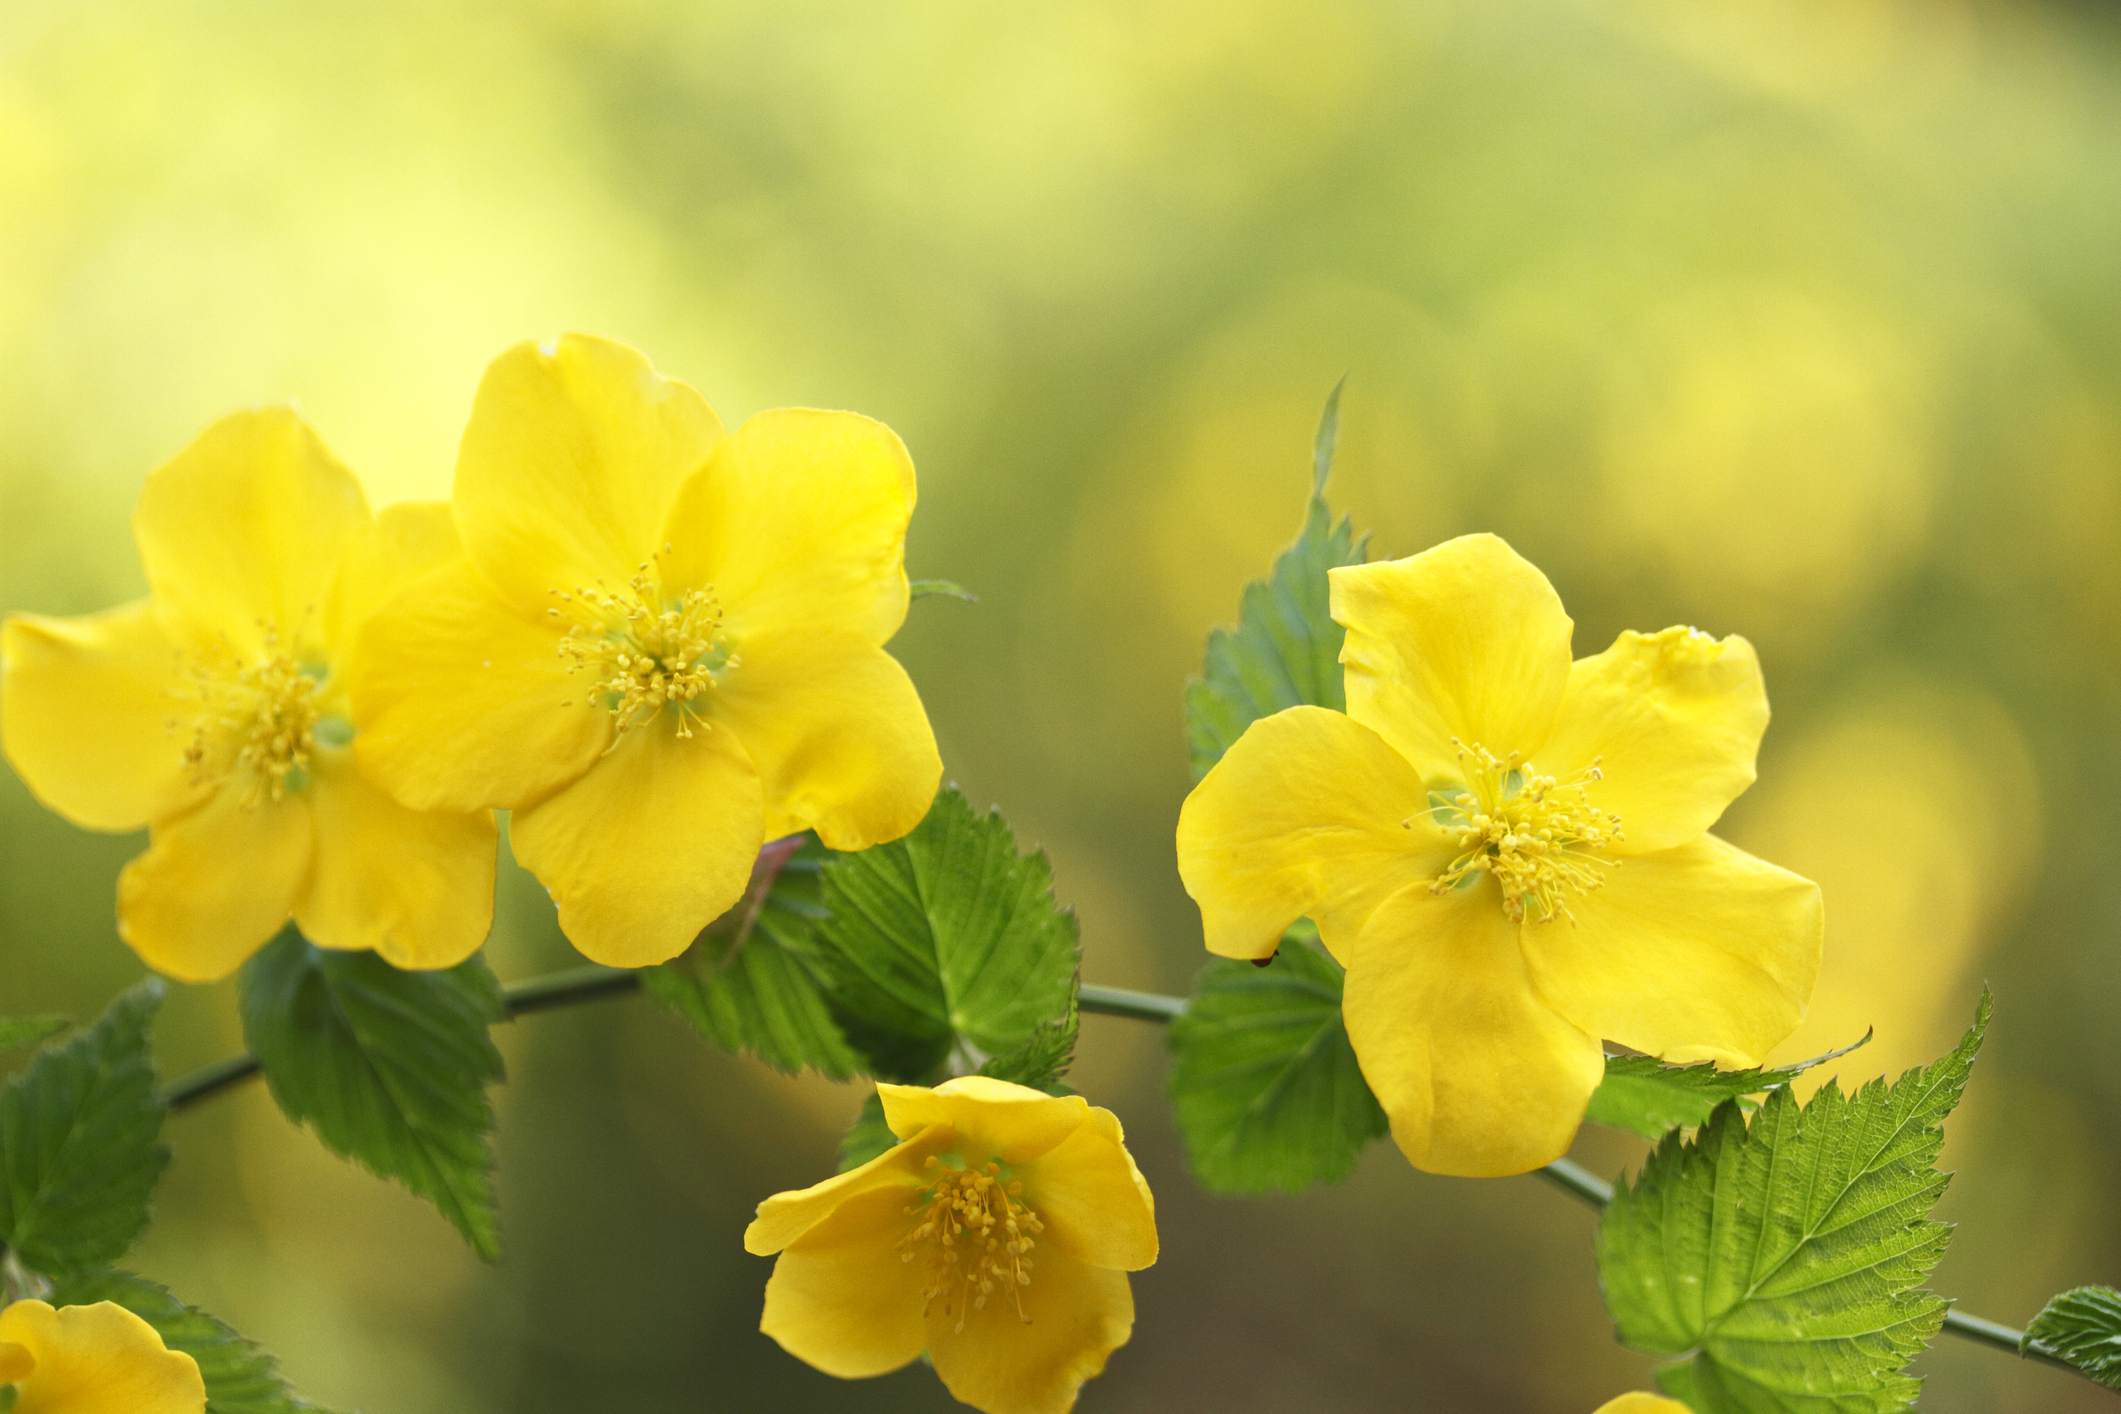 Big Yellow Flower Shaped Logo - 10 Best Shrubs With Yellow Flowers